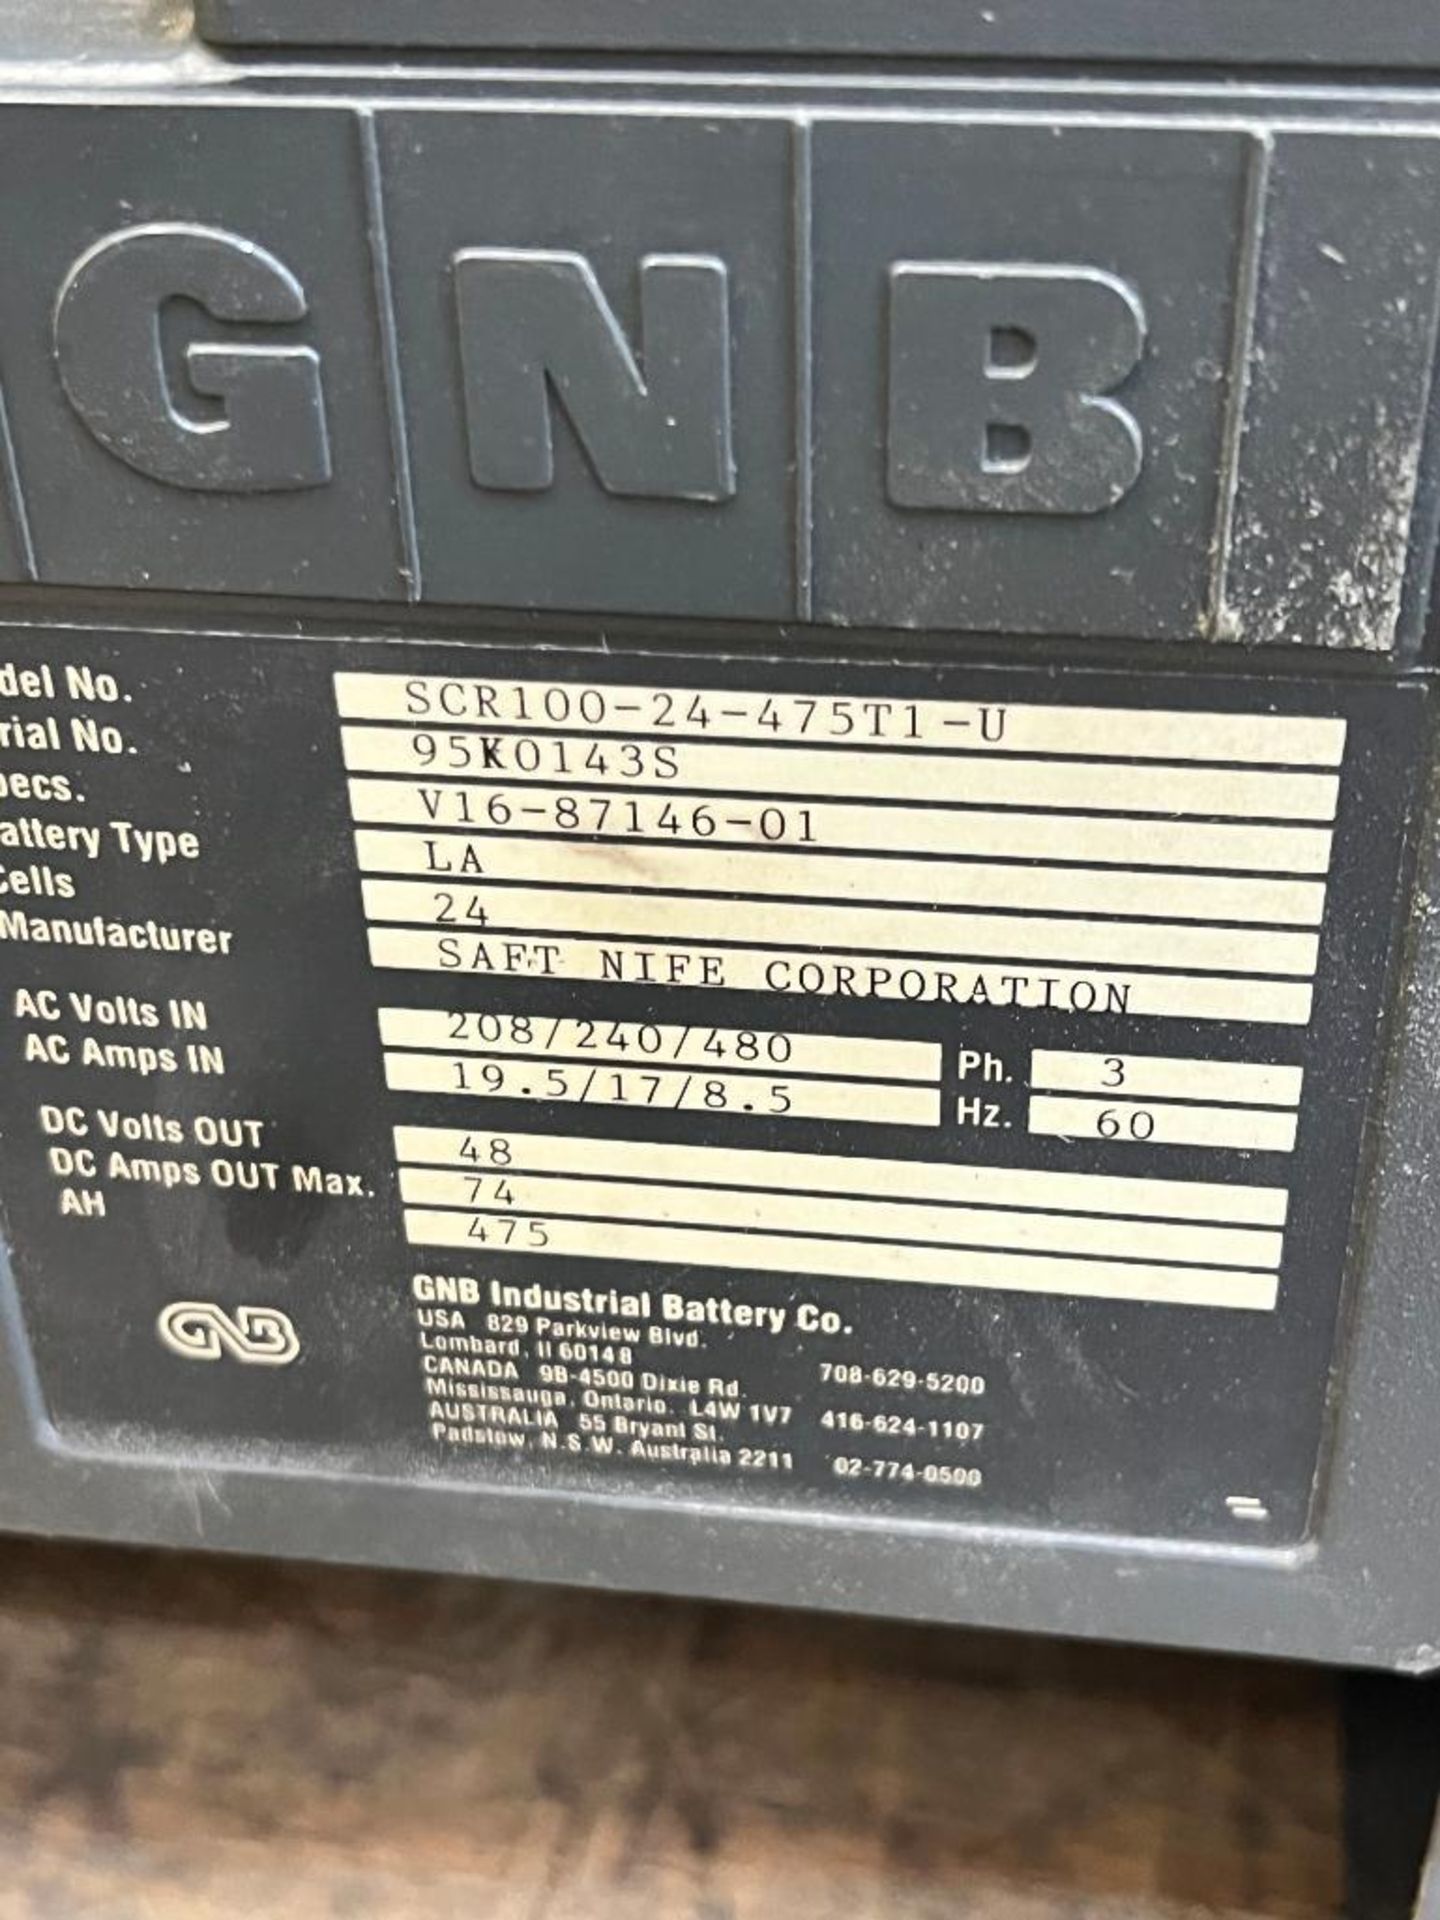 GNB BATTERY CHARGER, MODEL SCR100-24-475T1-U, S/N 95K0143S, BATTERY TYPE LA, 24 CELL, 3-PH, 60HZ, 20 - Image 3 of 3